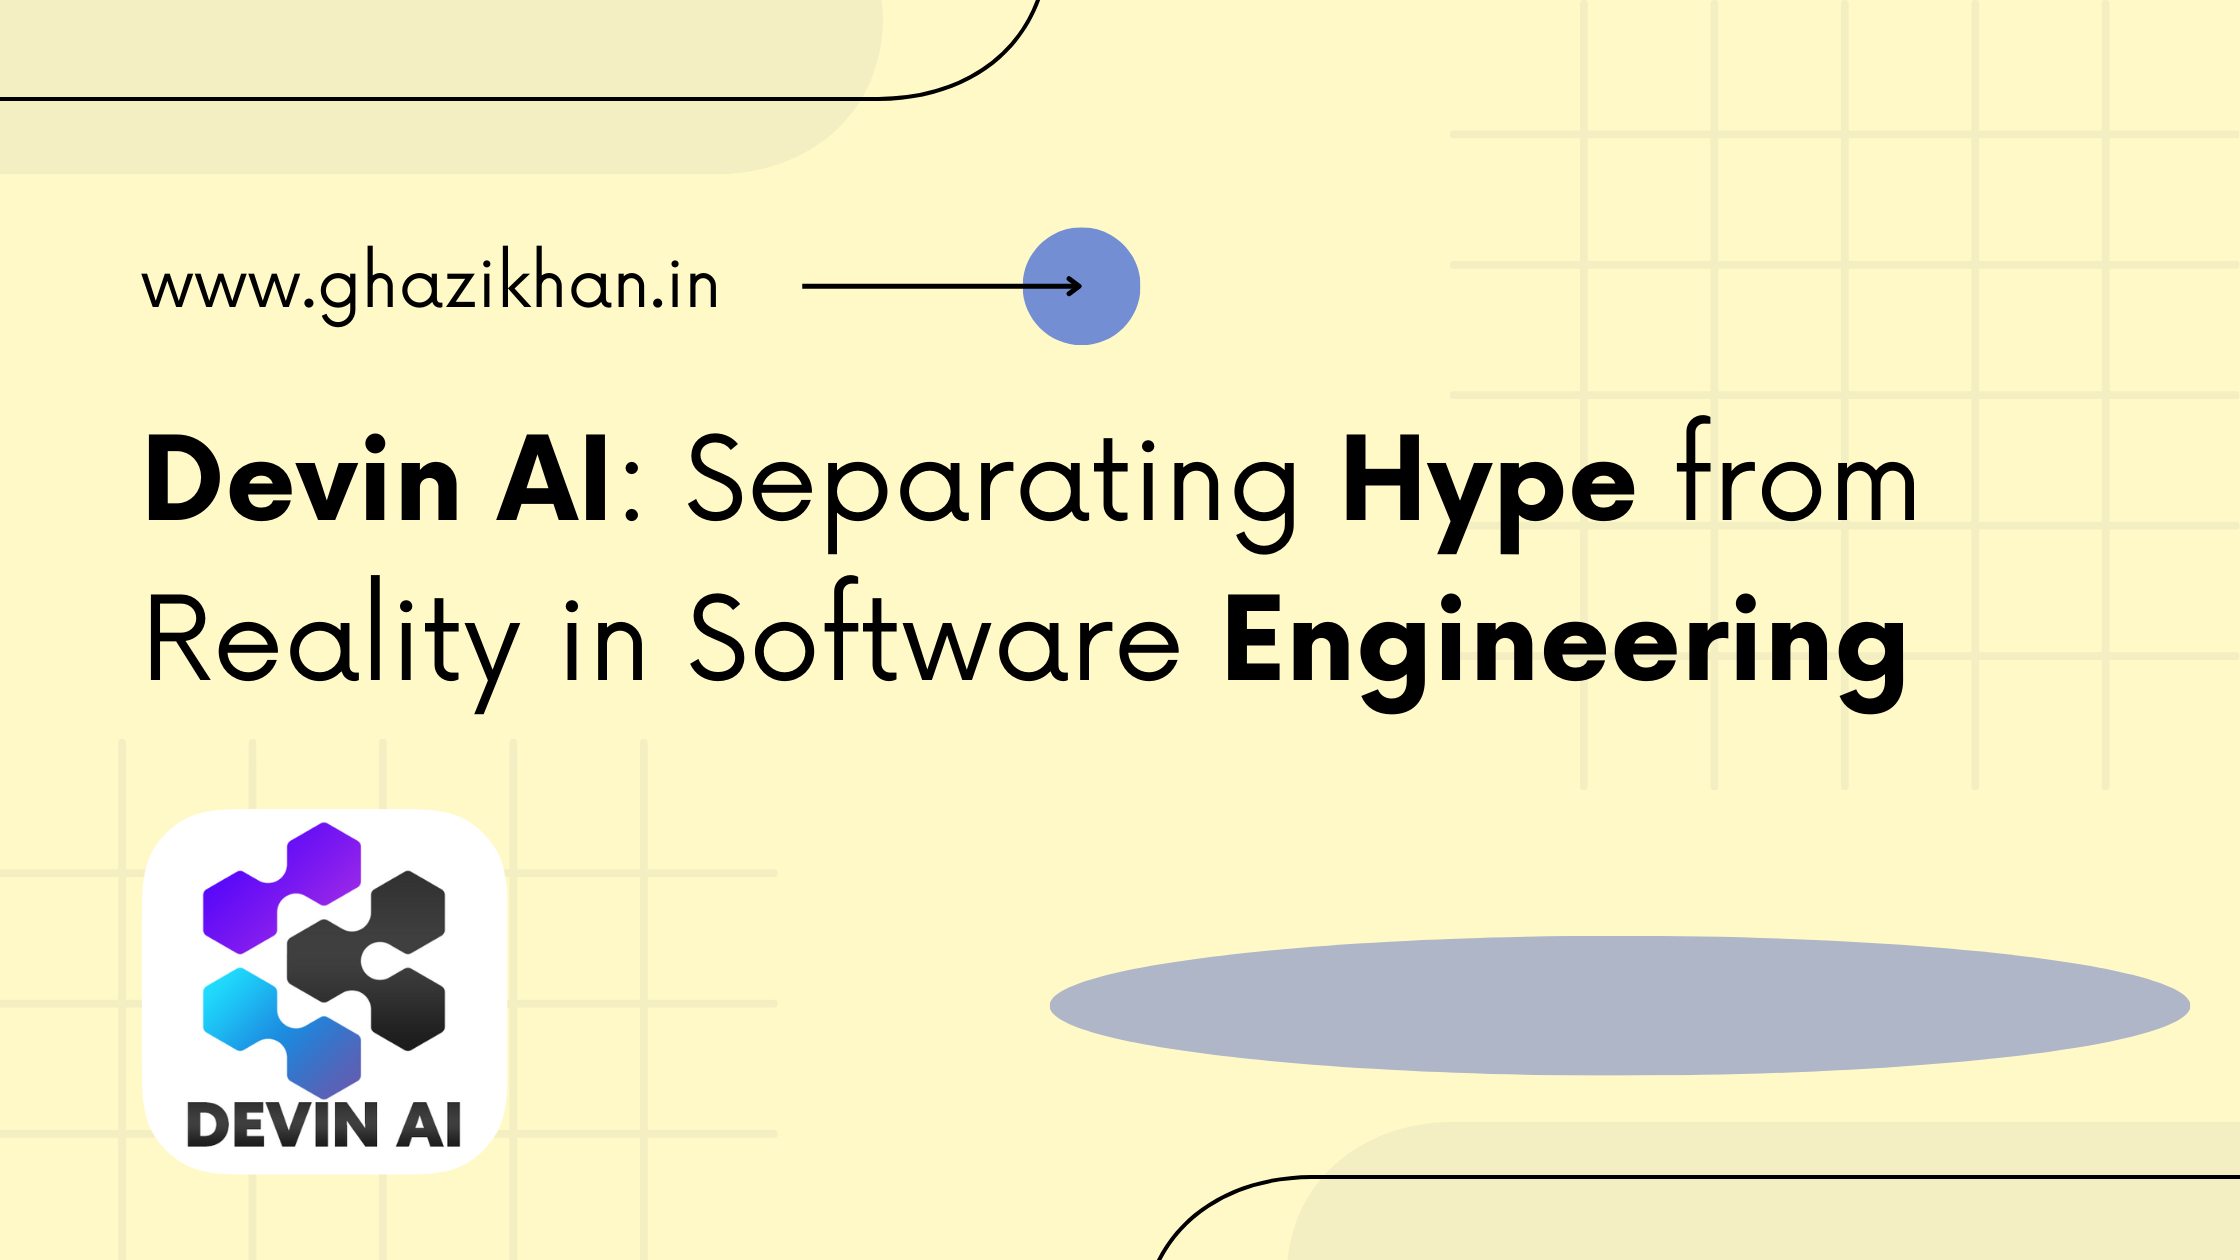 Devin AI: Separating Hype from Reality in Software Engineering